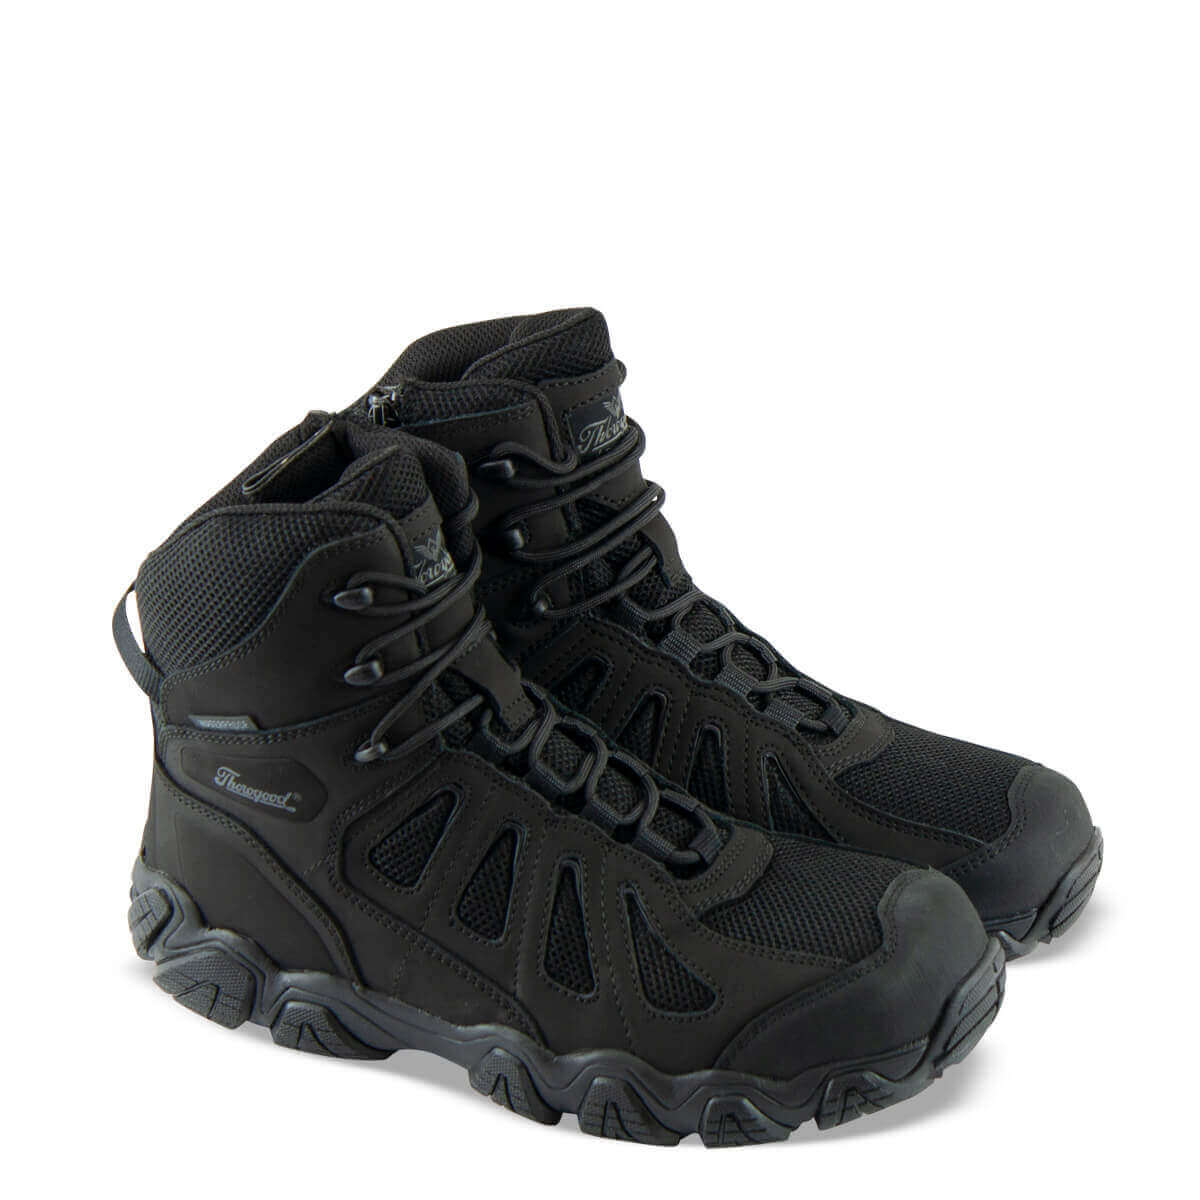 Thorogood Crosstrex Series Safety Toe Side Zip BBP Waterproof 6 Inch Hiker Boots from GME Supply